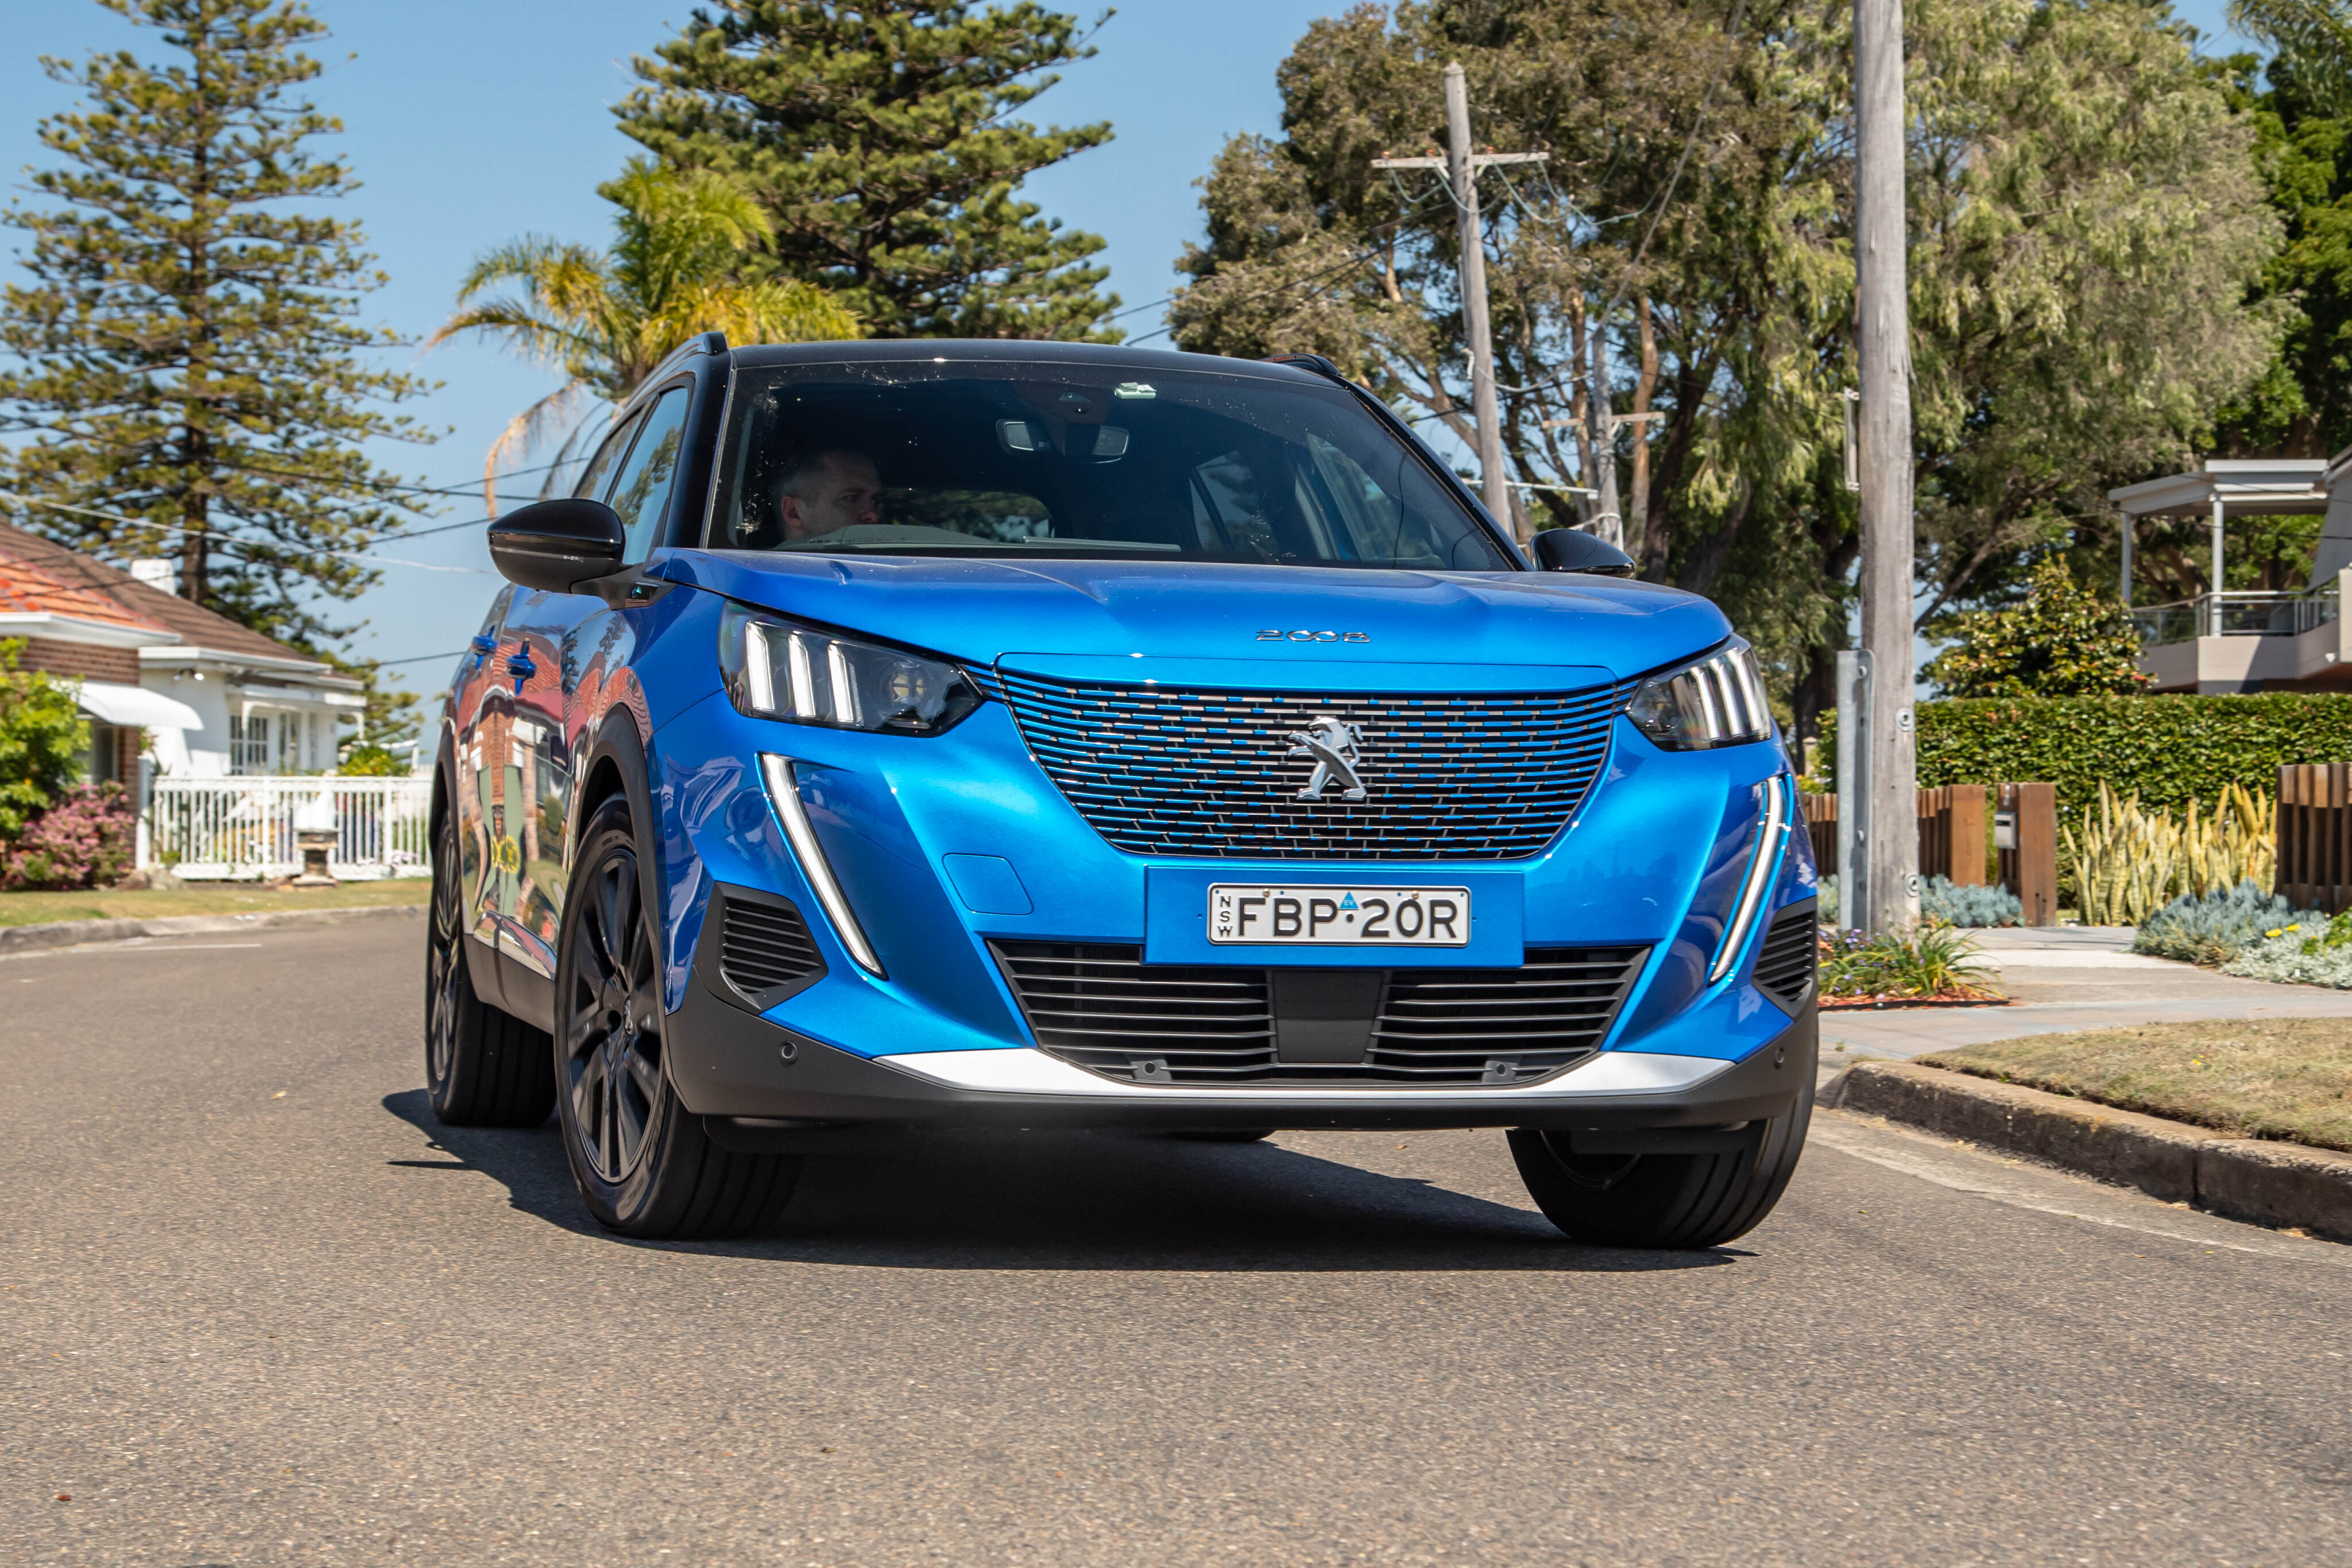 First Drive Review: Peugeot 2008